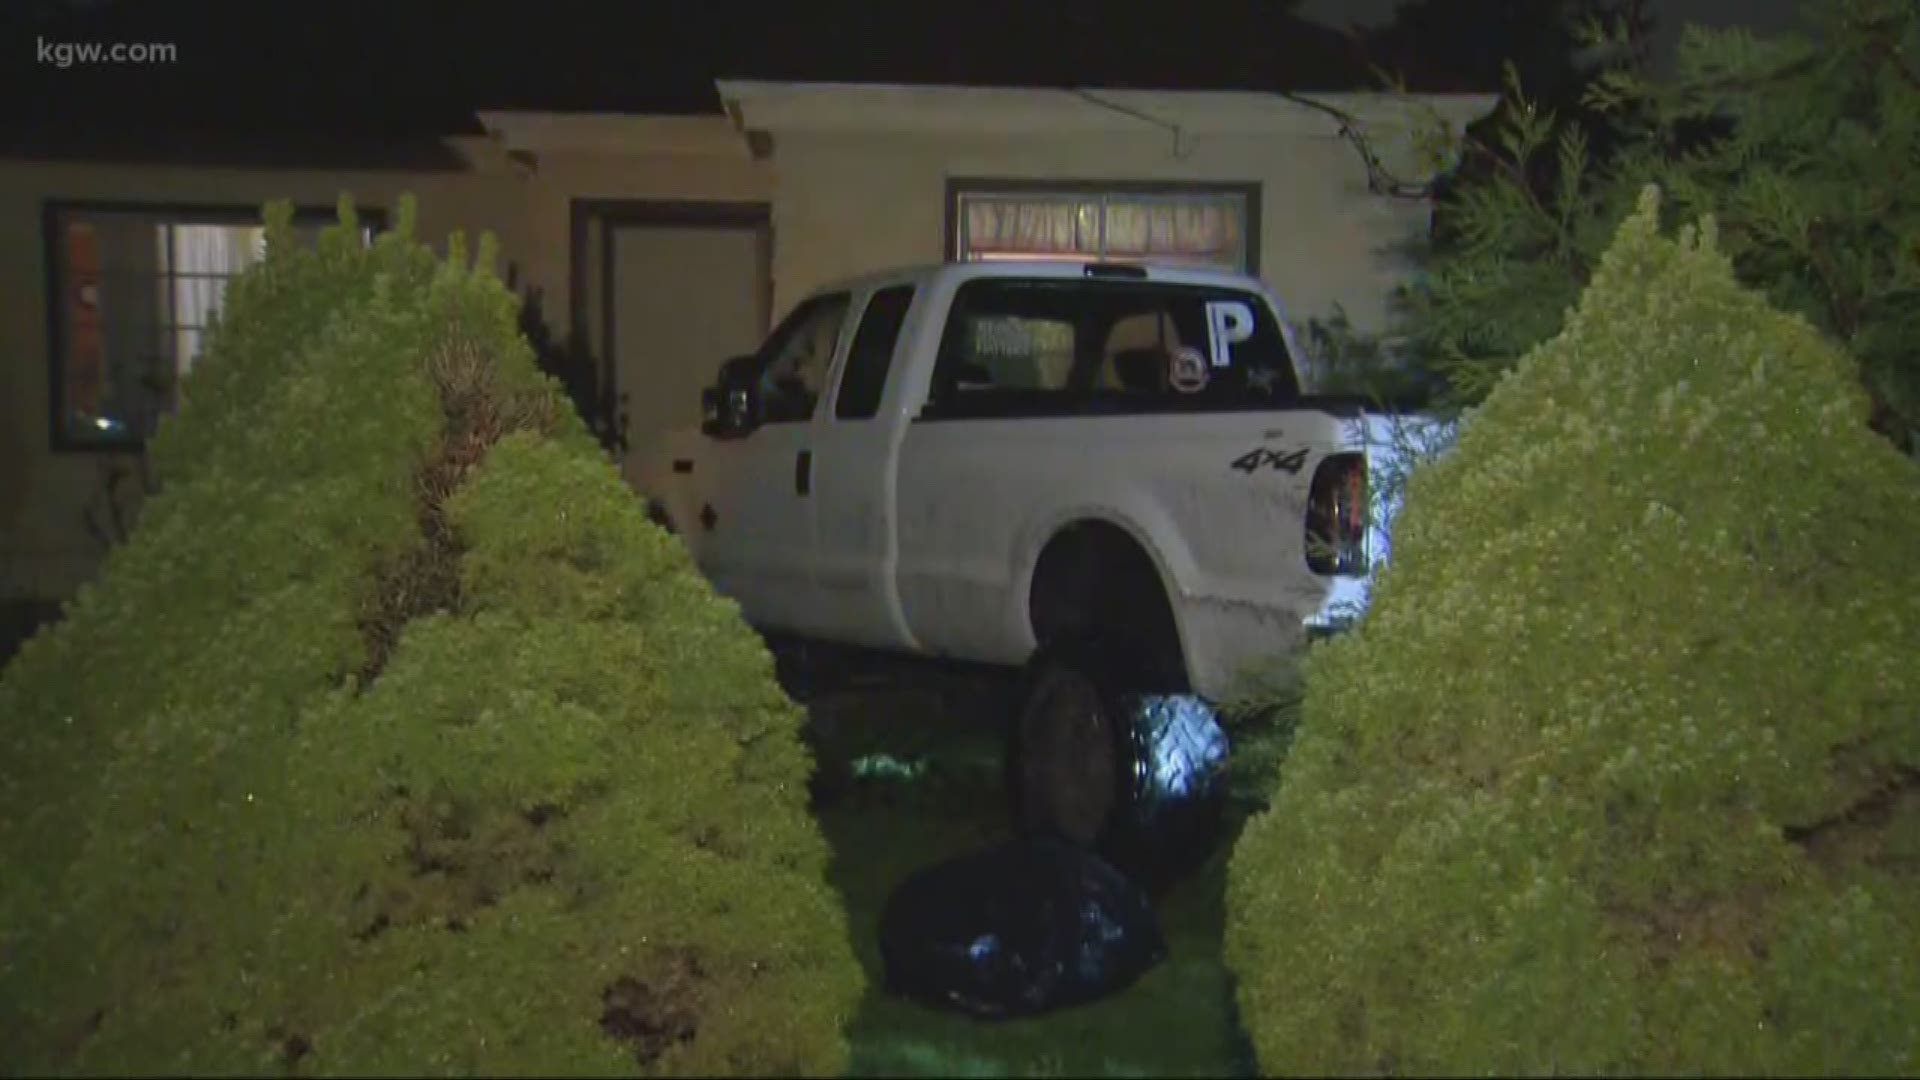 A truck theft lead to a shooting, crash and standoff in Southeast Portland.